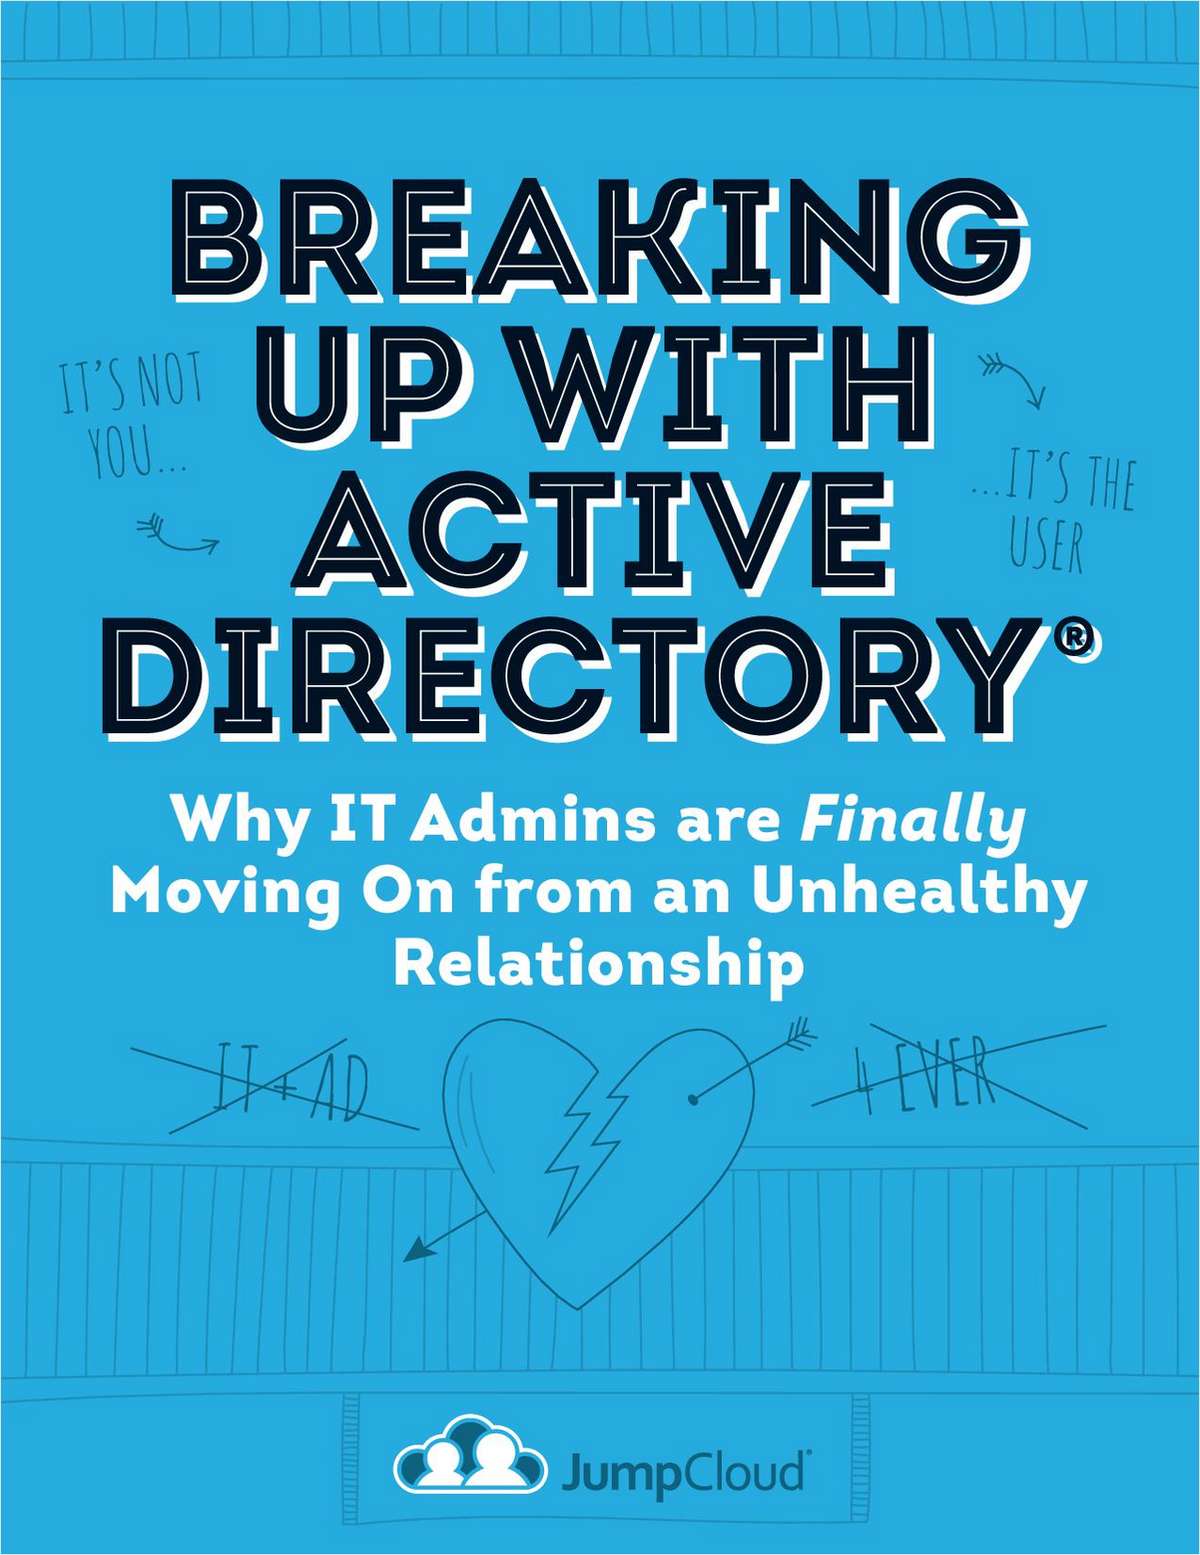 Breaking Up with Active Directory